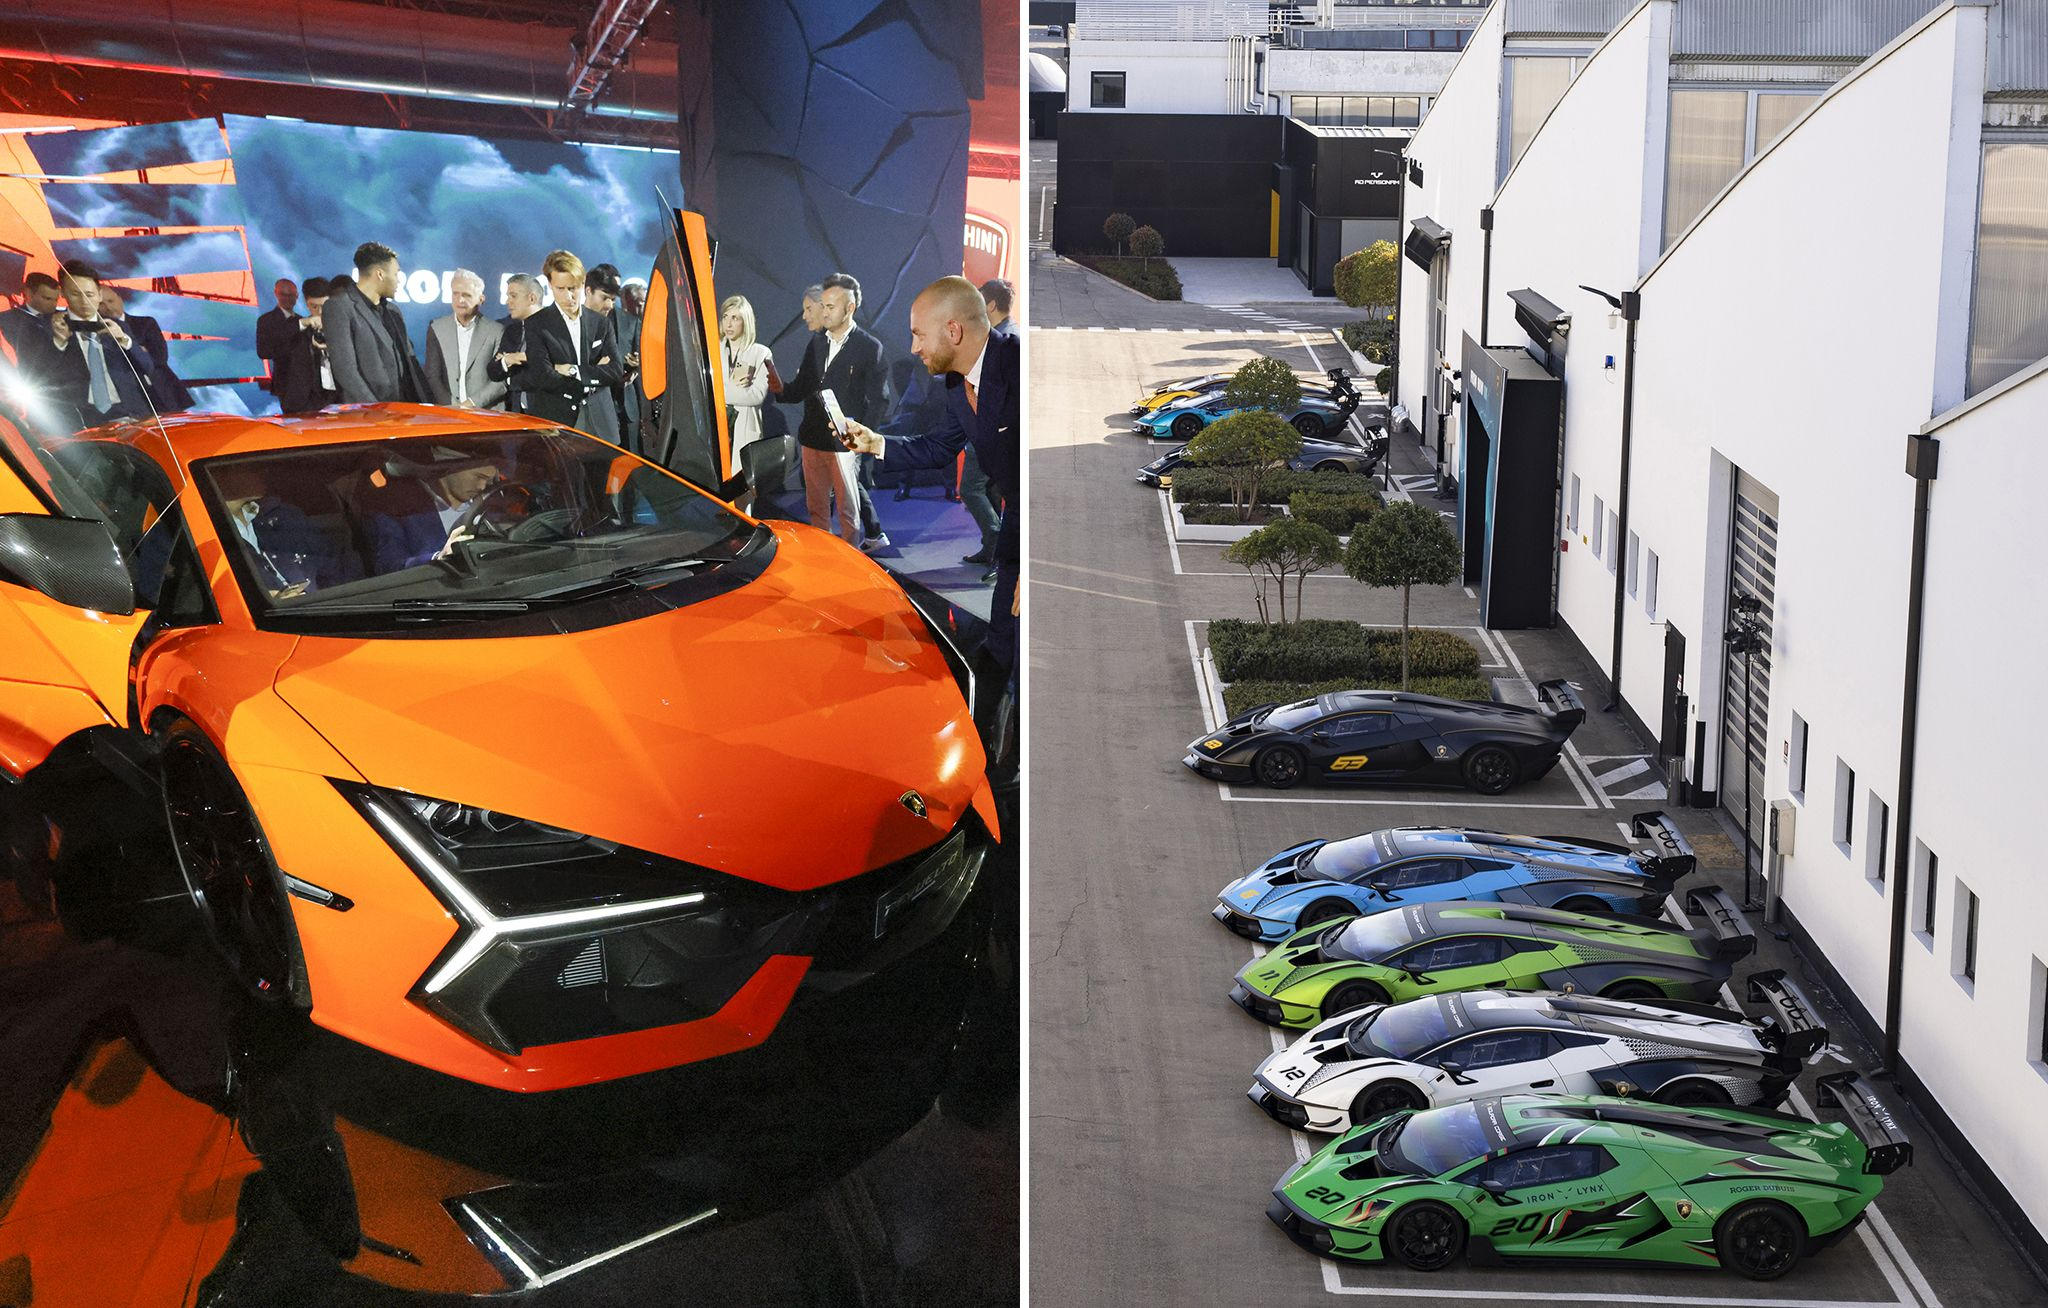 Lamborghini The first super sports V12 hybrid HPEV, unveiled to media, owners and celebrities  (3)